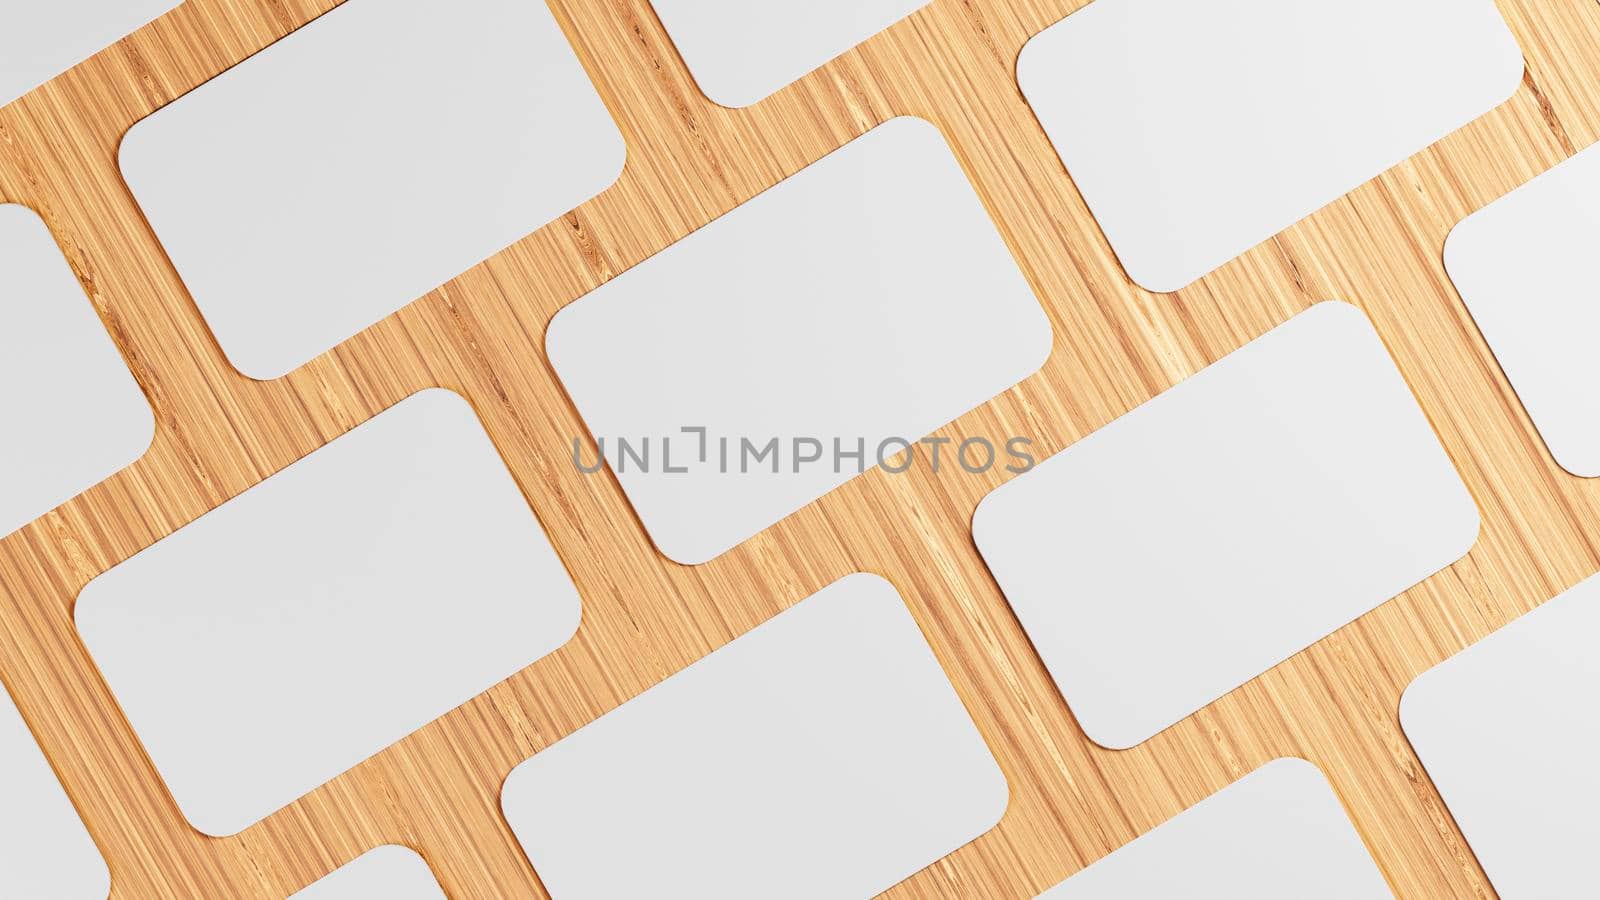 Stacks of white Business cards, 3d rendering